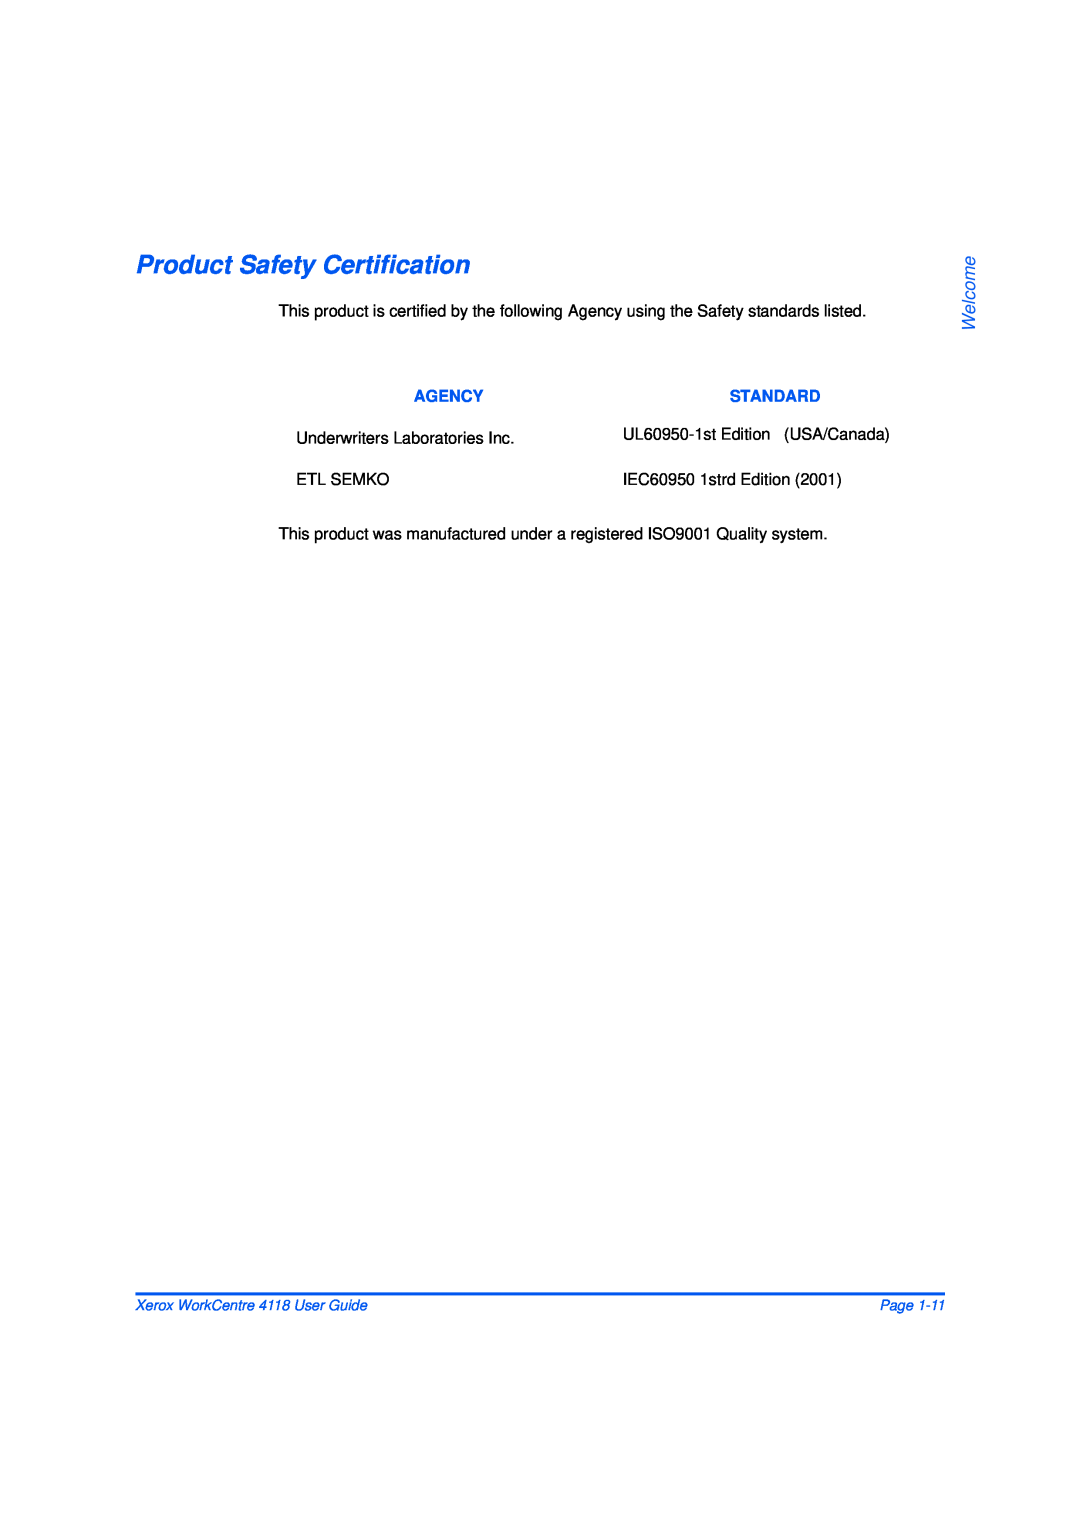 Xerox 32N00467 manual Product Safety Certification, Welcome, Agency, Standard, Xerox WorkCentre 4118 User Guide, Page 